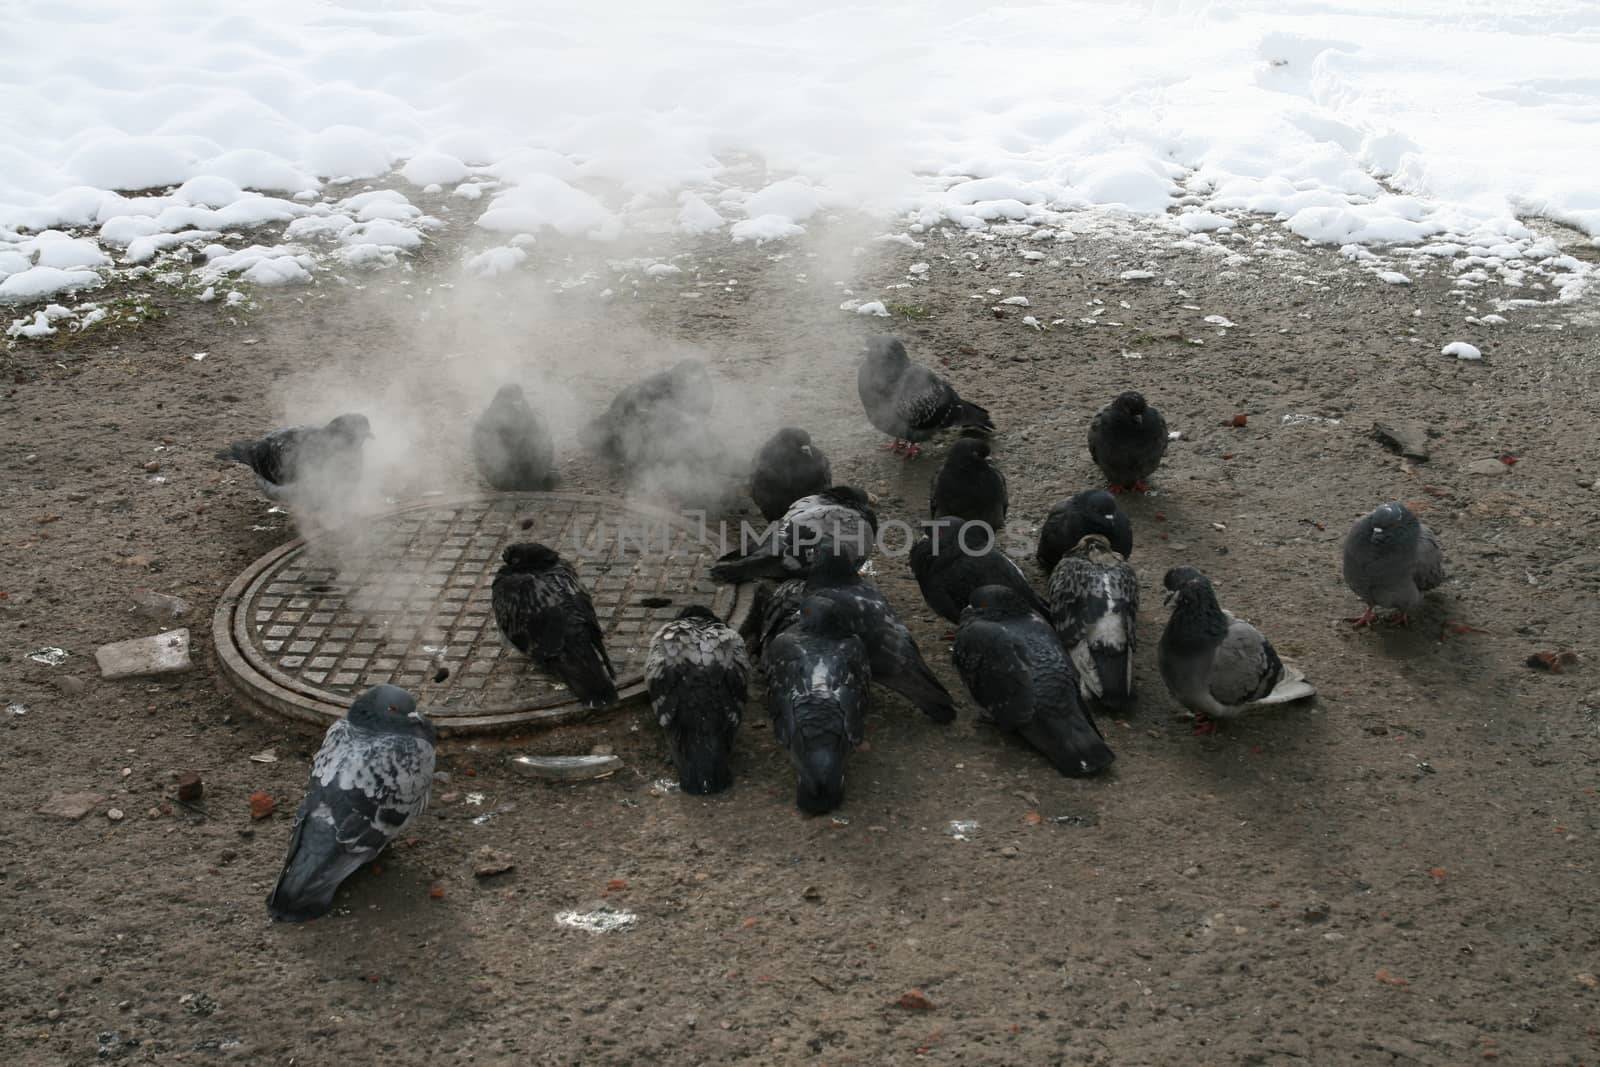 Urban pigeons warm in the winter next to the manhole by MichalLudwiczak